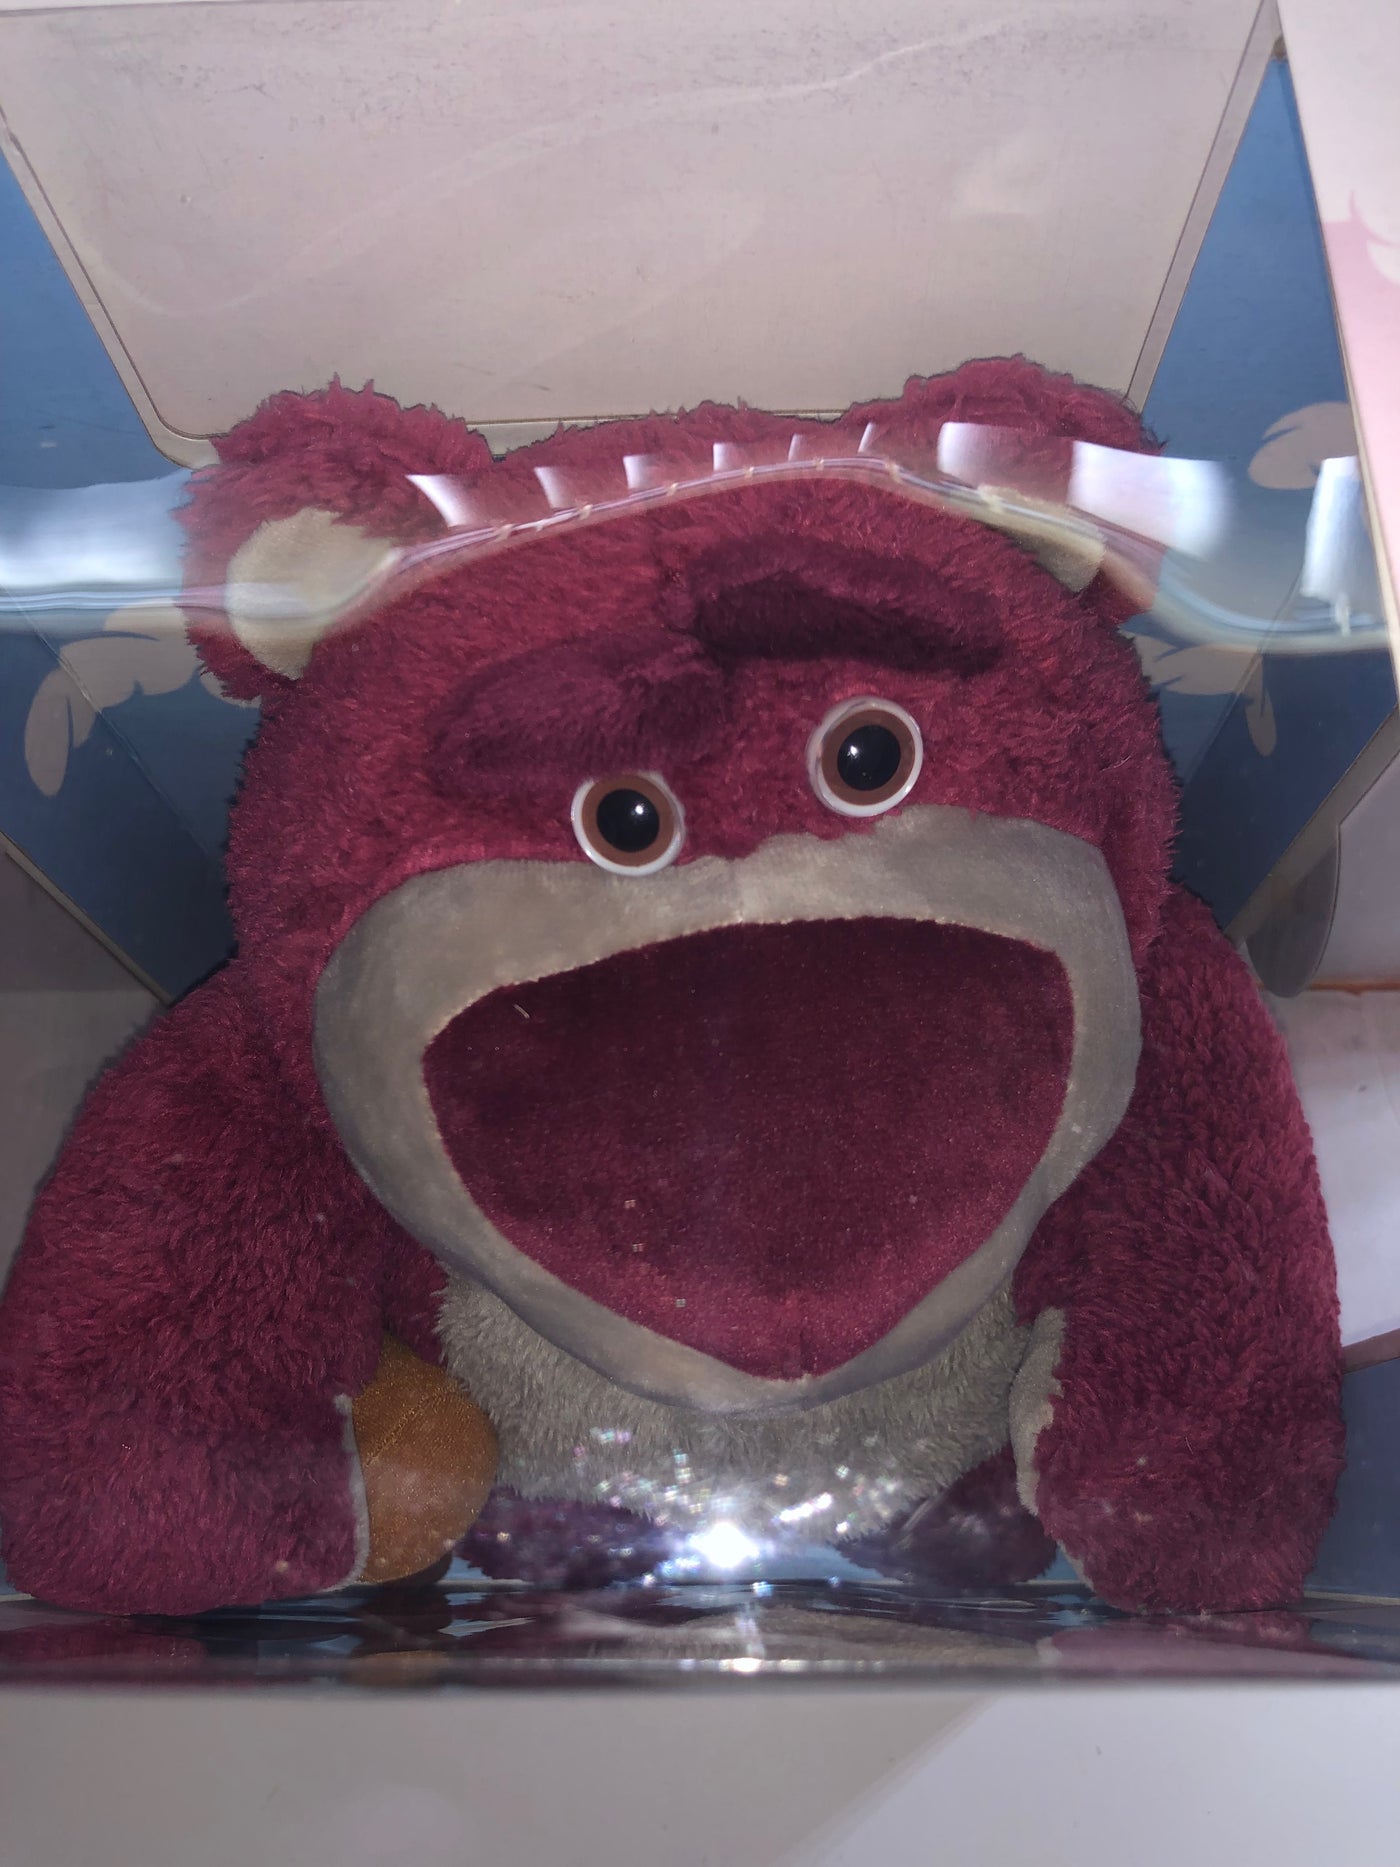 Disney Store Toy Story Strawberry Scented Limited Talking Lotso Plush New w Box